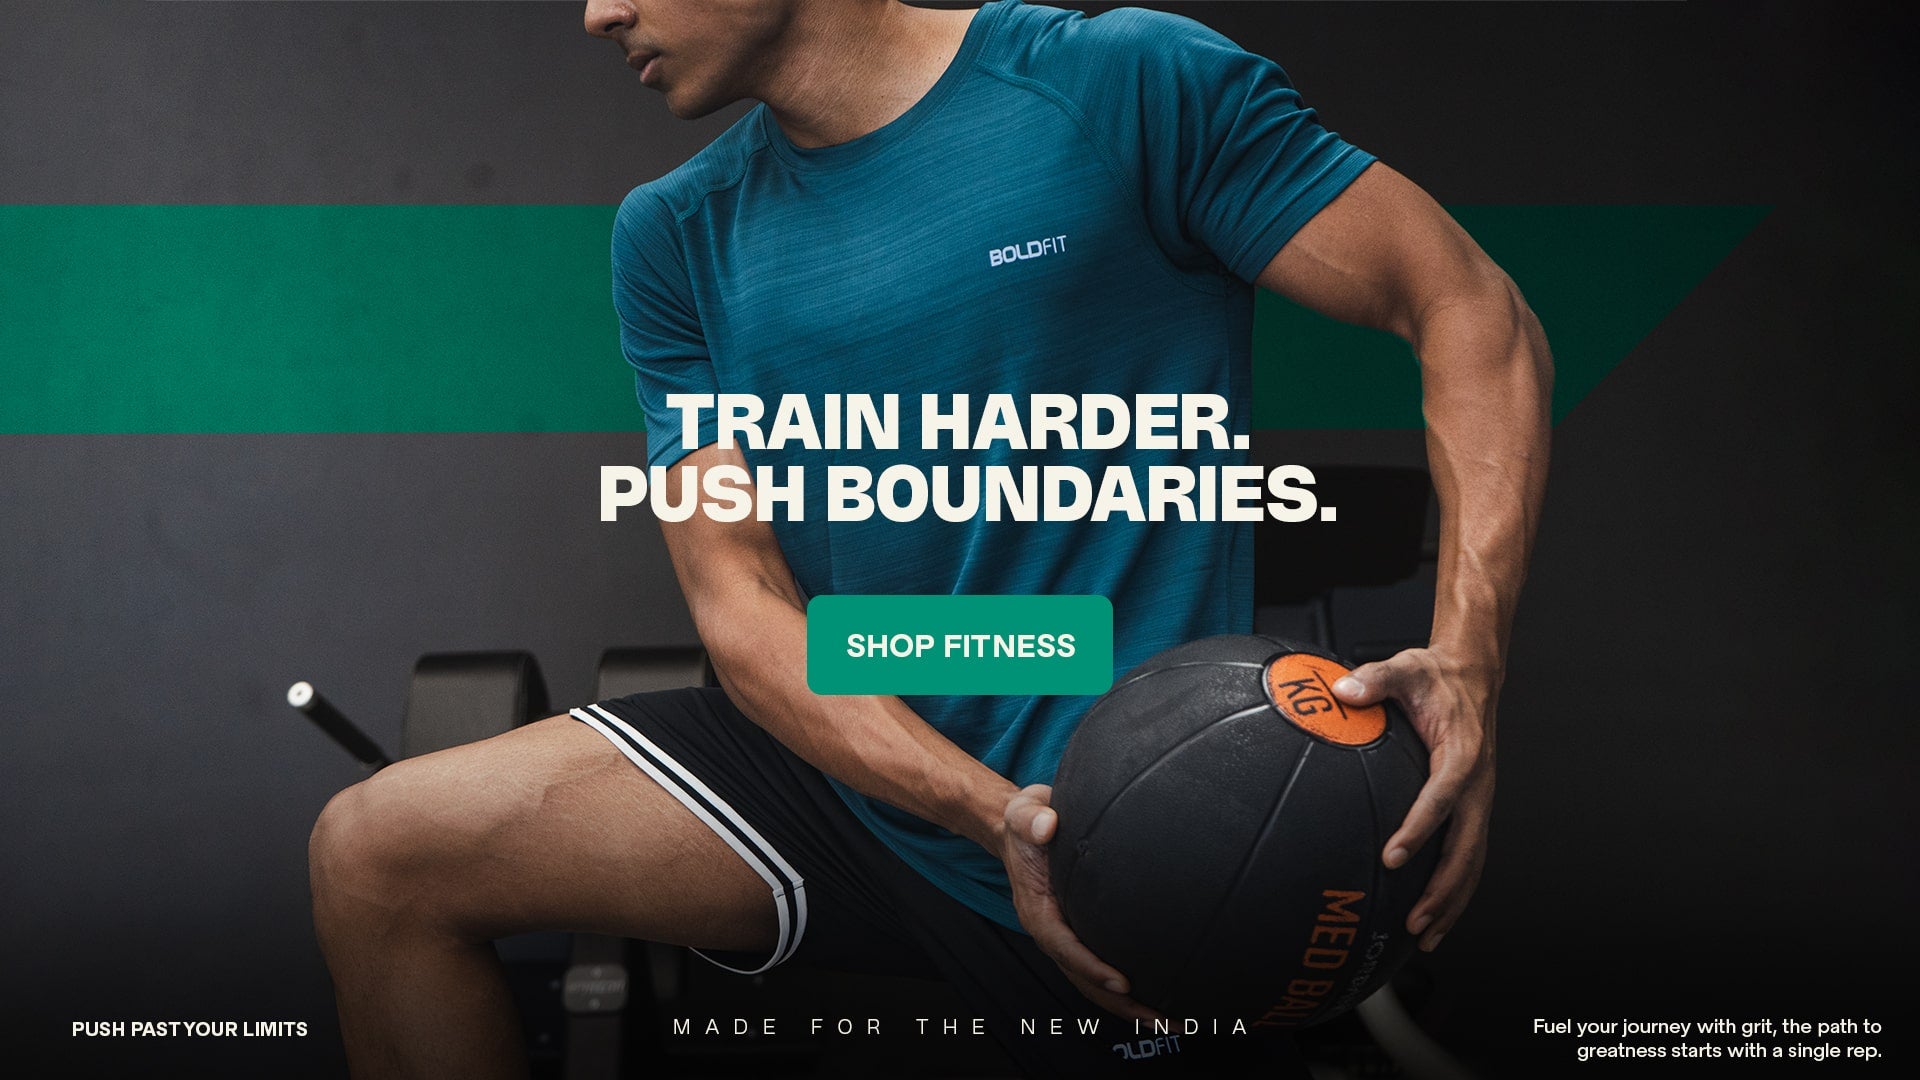 Boldfit, Made for the Bold, Health & Fitness